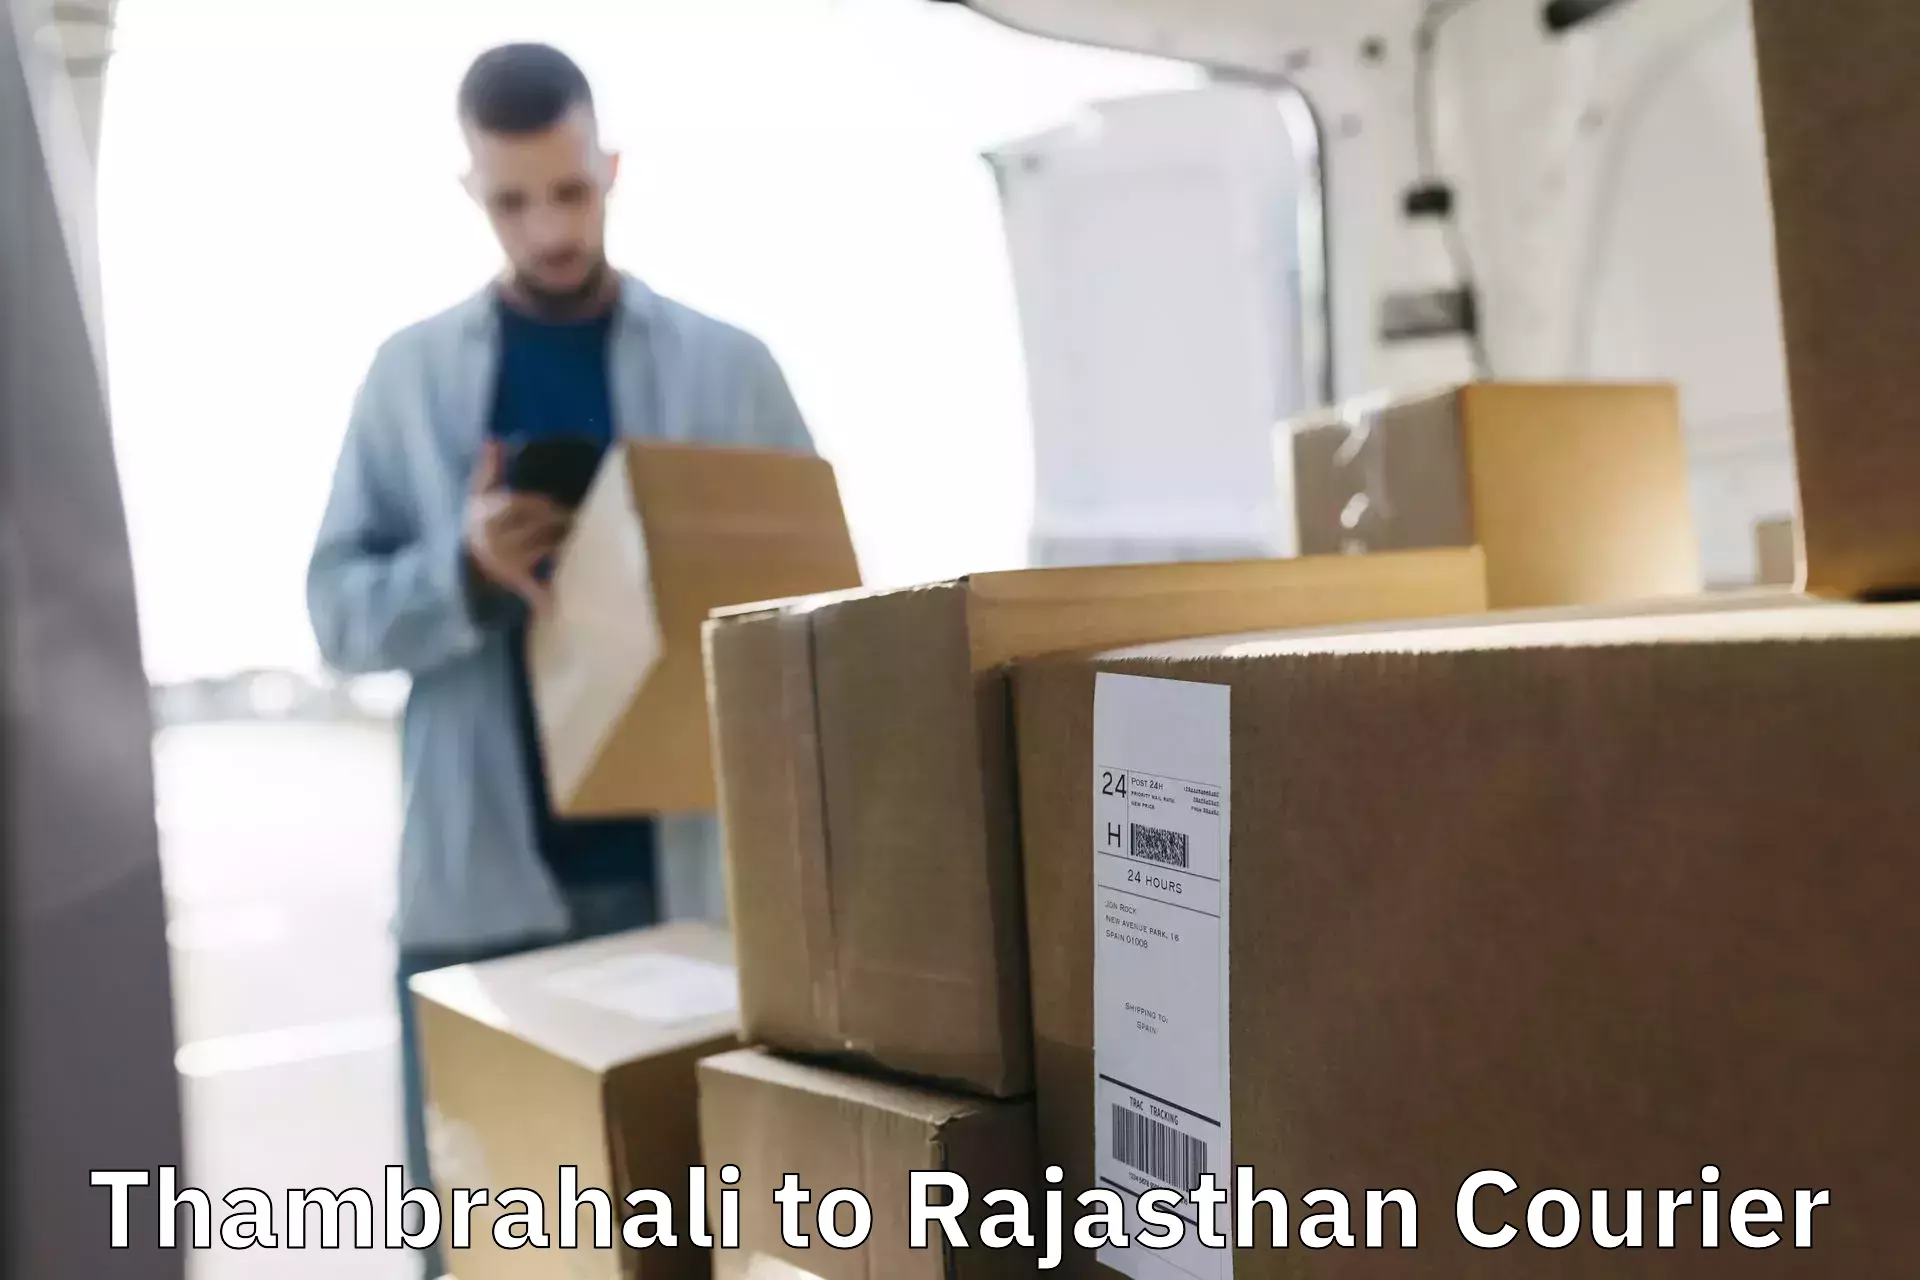 Multi-service courier options Thambrahali to Sangaria